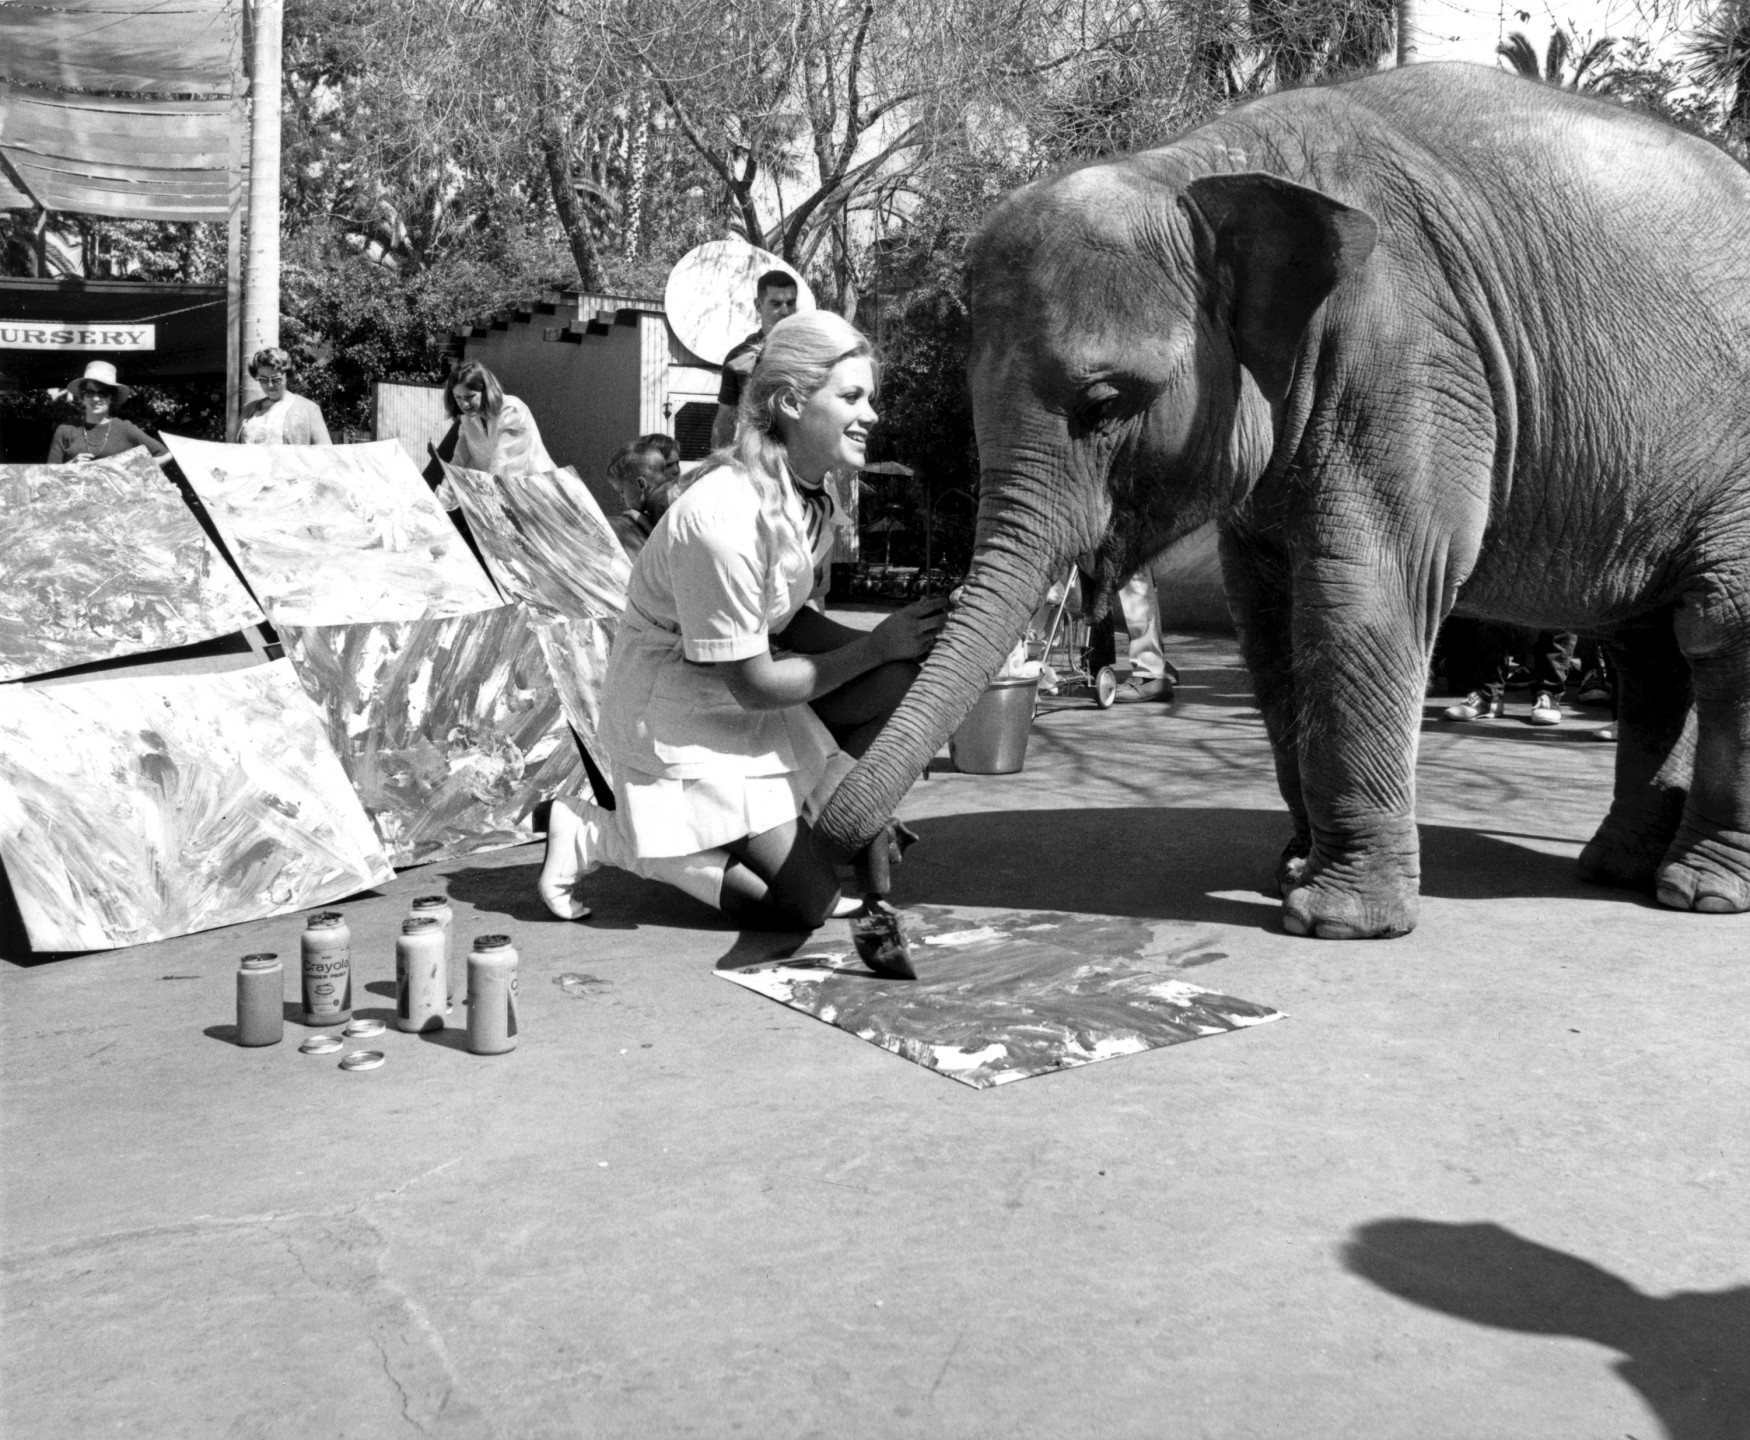 In 1970, Joan Embery was 18 years old and working as an attendant in the Children’s Zoo. The Zoo was looking for someone to act as ambassador for the media, and advertised for applicants to become “Miss Zoofari.” Hundreds of applications were received, and after extensive interviews, one young lady was chosen, but it wasn’t Joan—not yet. But as it turned out, the first Miss Zoofari was nervous around animals and didn’t really like public speaking that much. After a year, she decided the job really wasn’t for her and left. Dr. Schroeder’s wife had met Joan and suggested to Bill Seaton, head of public relations, that she might be just who they were looking for. Joan was hired to represent the Zoo on a trial basis, but she also continued to work in the Children’s Zoo. One of the animals she worked with was Carol the elephant, and Joan taught her to paint pictures, a novelty that delighted guests.
